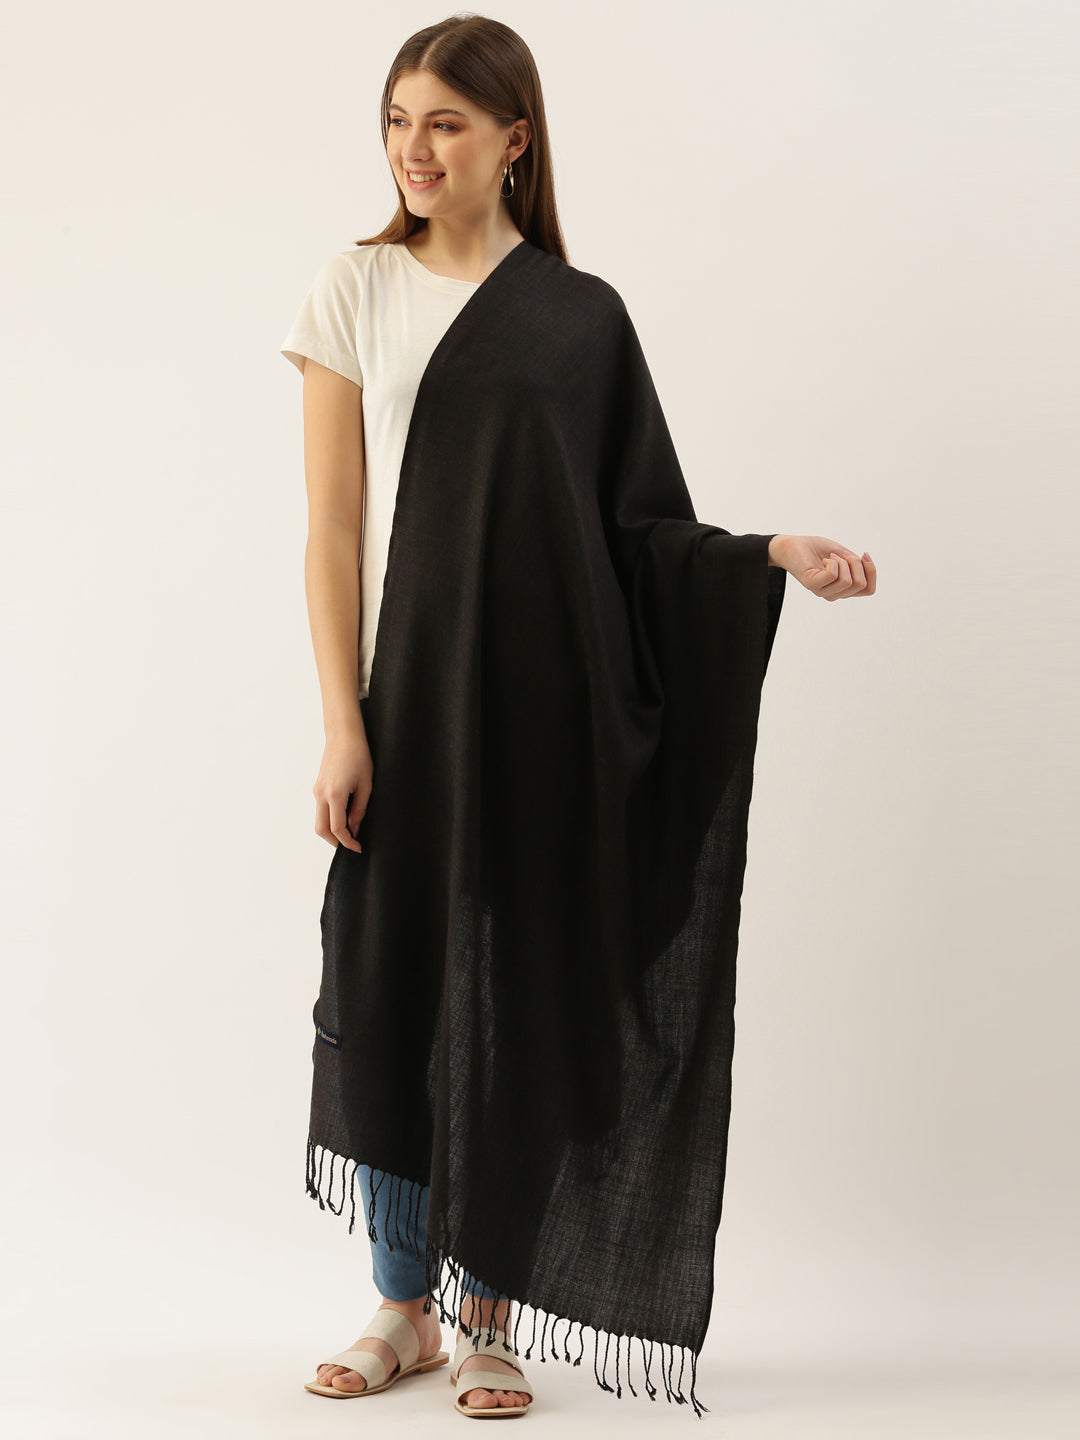 Women’s Black Solid Stole (28x80 Inches)